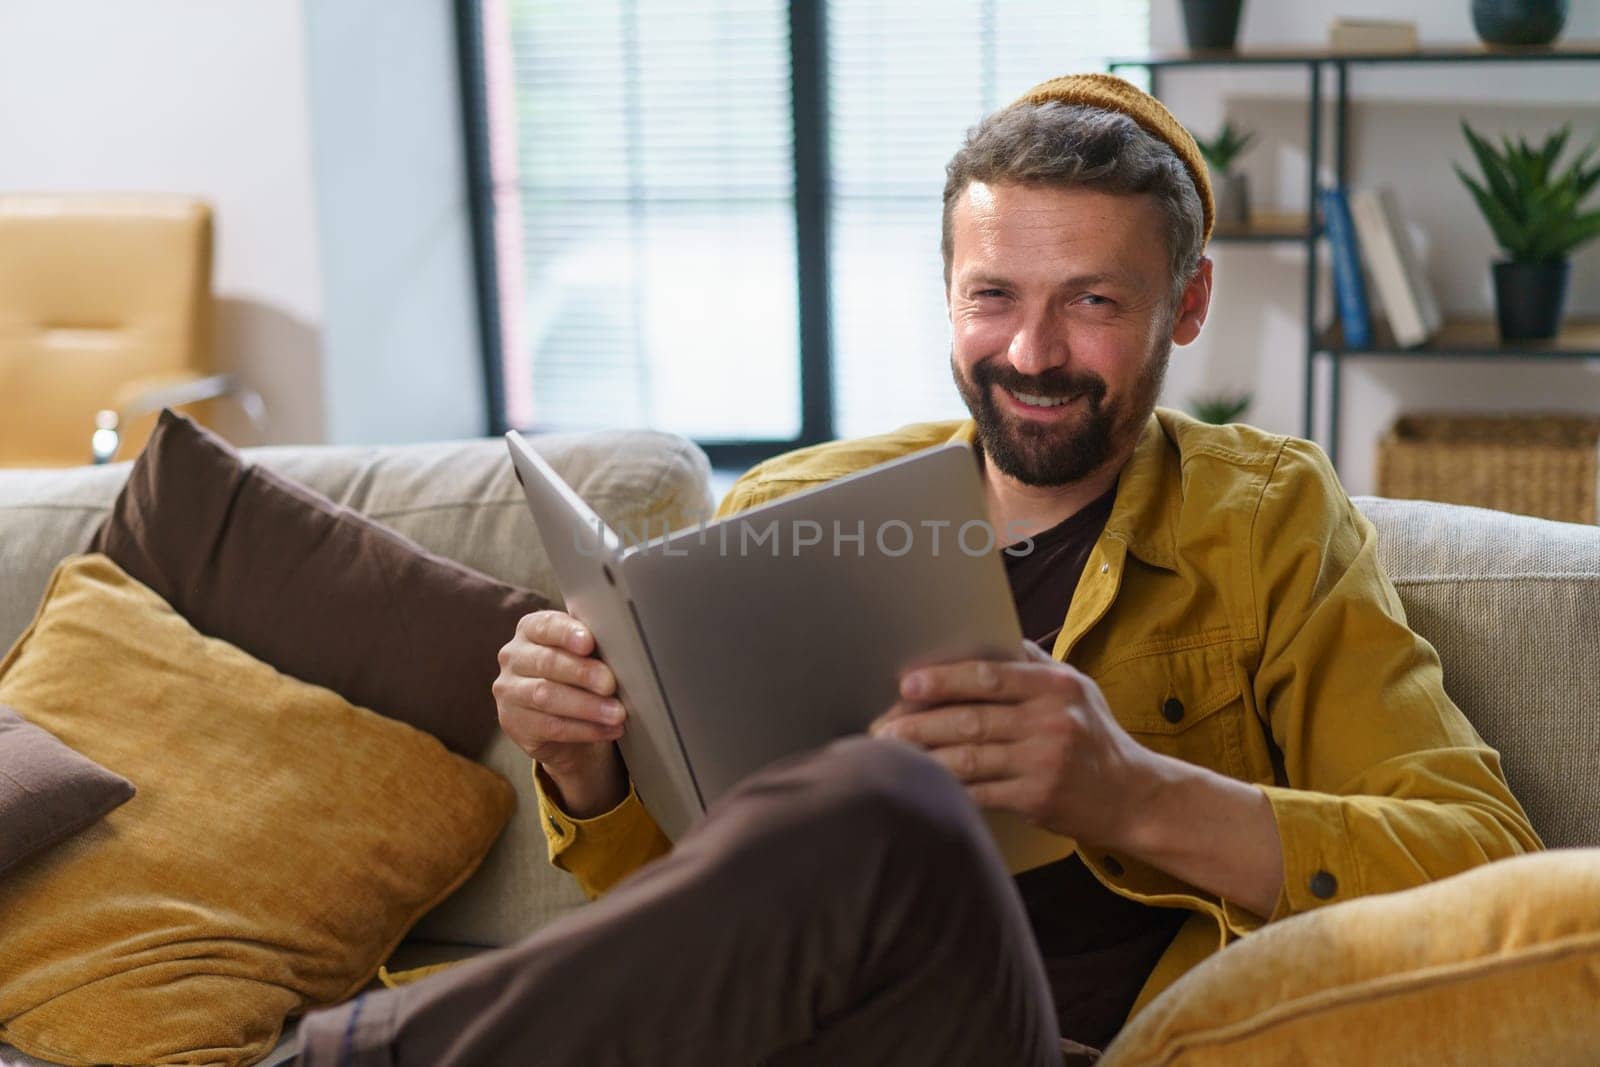 Student engaging in deceptive behavior sit on sofa and hold laptop like book indoors. Concept of cheating, highlighting student's questionable actions in academic context. High quality photo